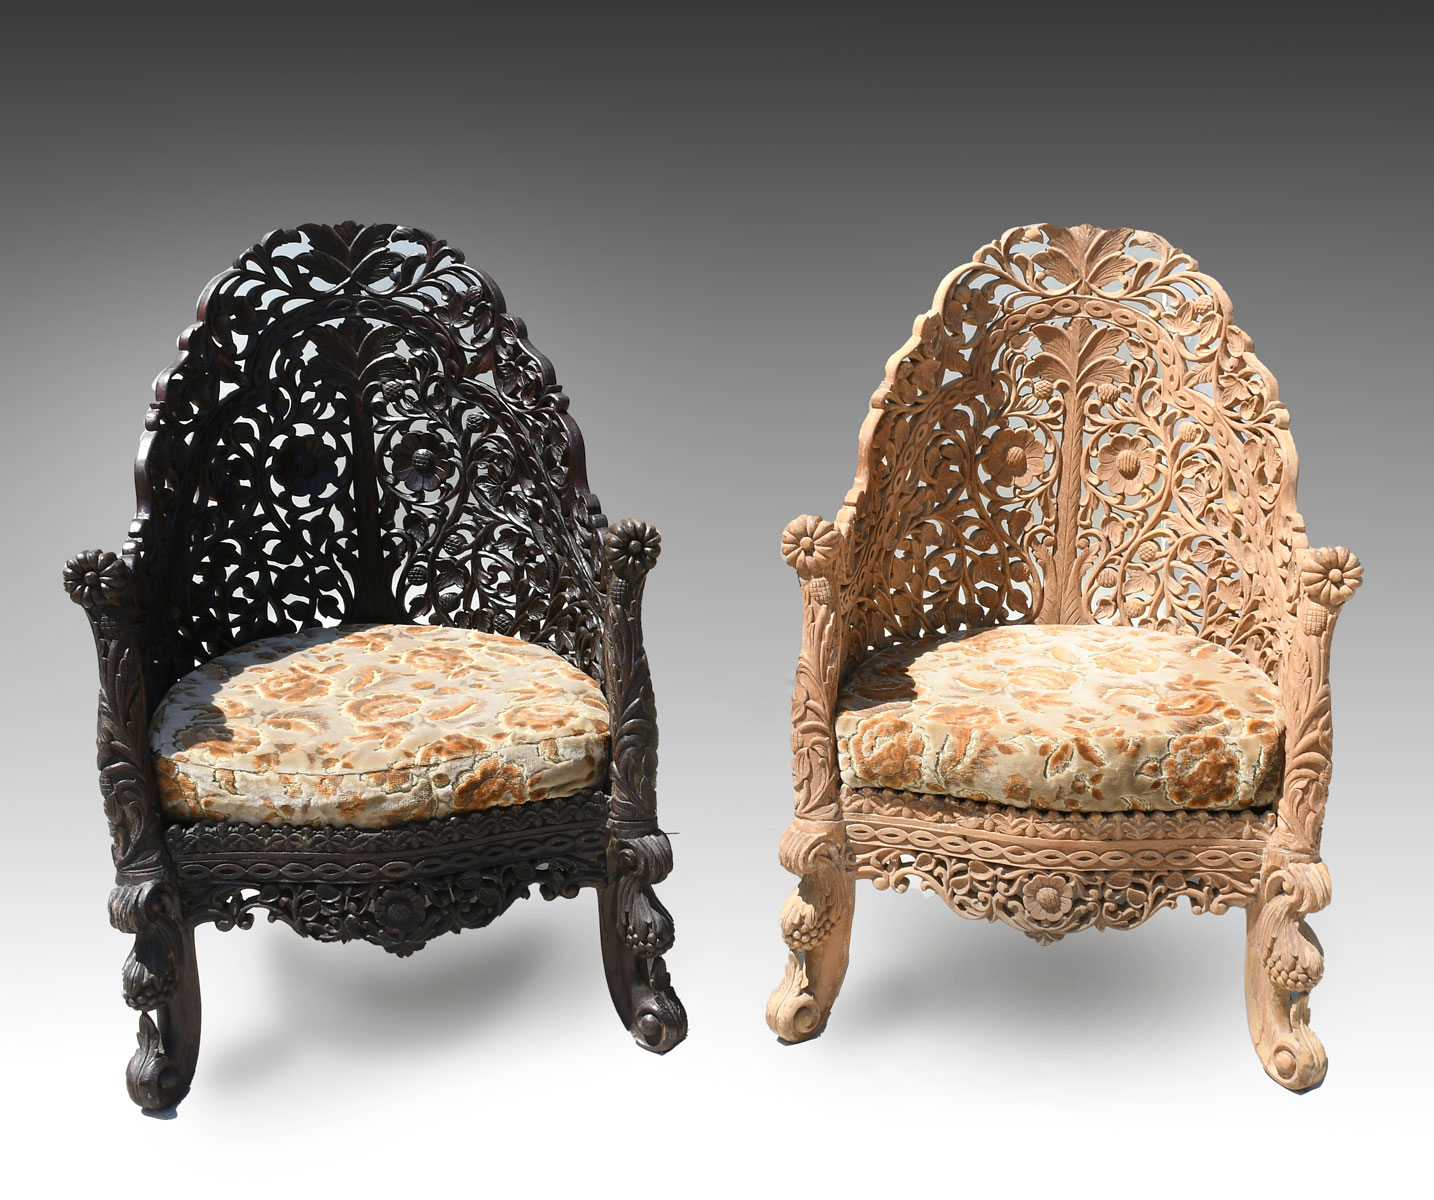 PAIR OF BURMESE CARVED CHAIRS: